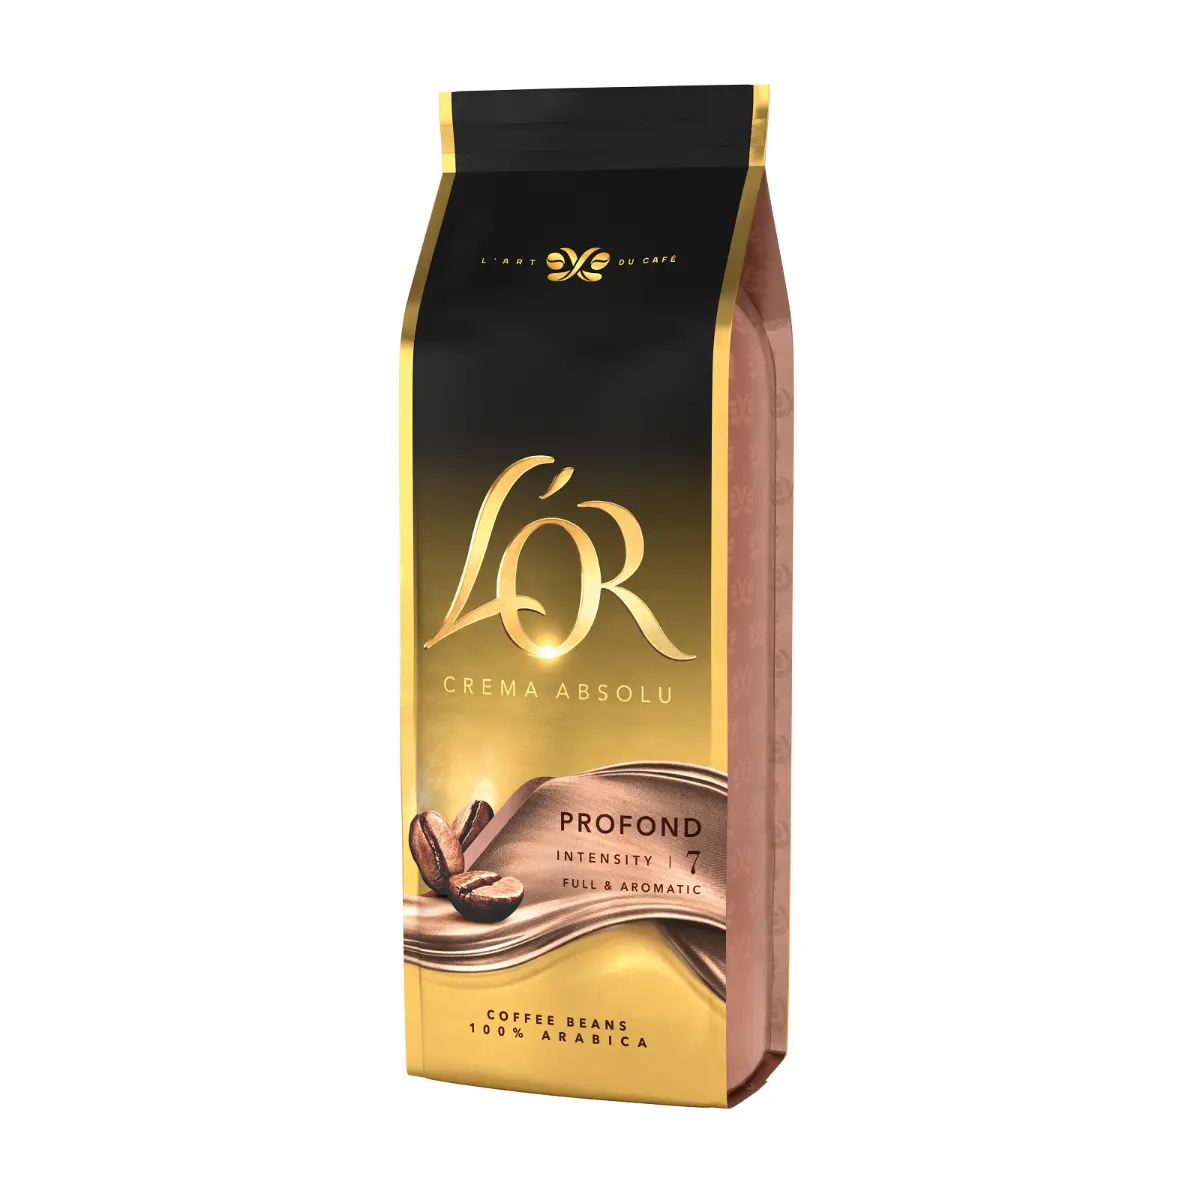 Cafea boabe L'OR Crema Absolu Profond, 500 g